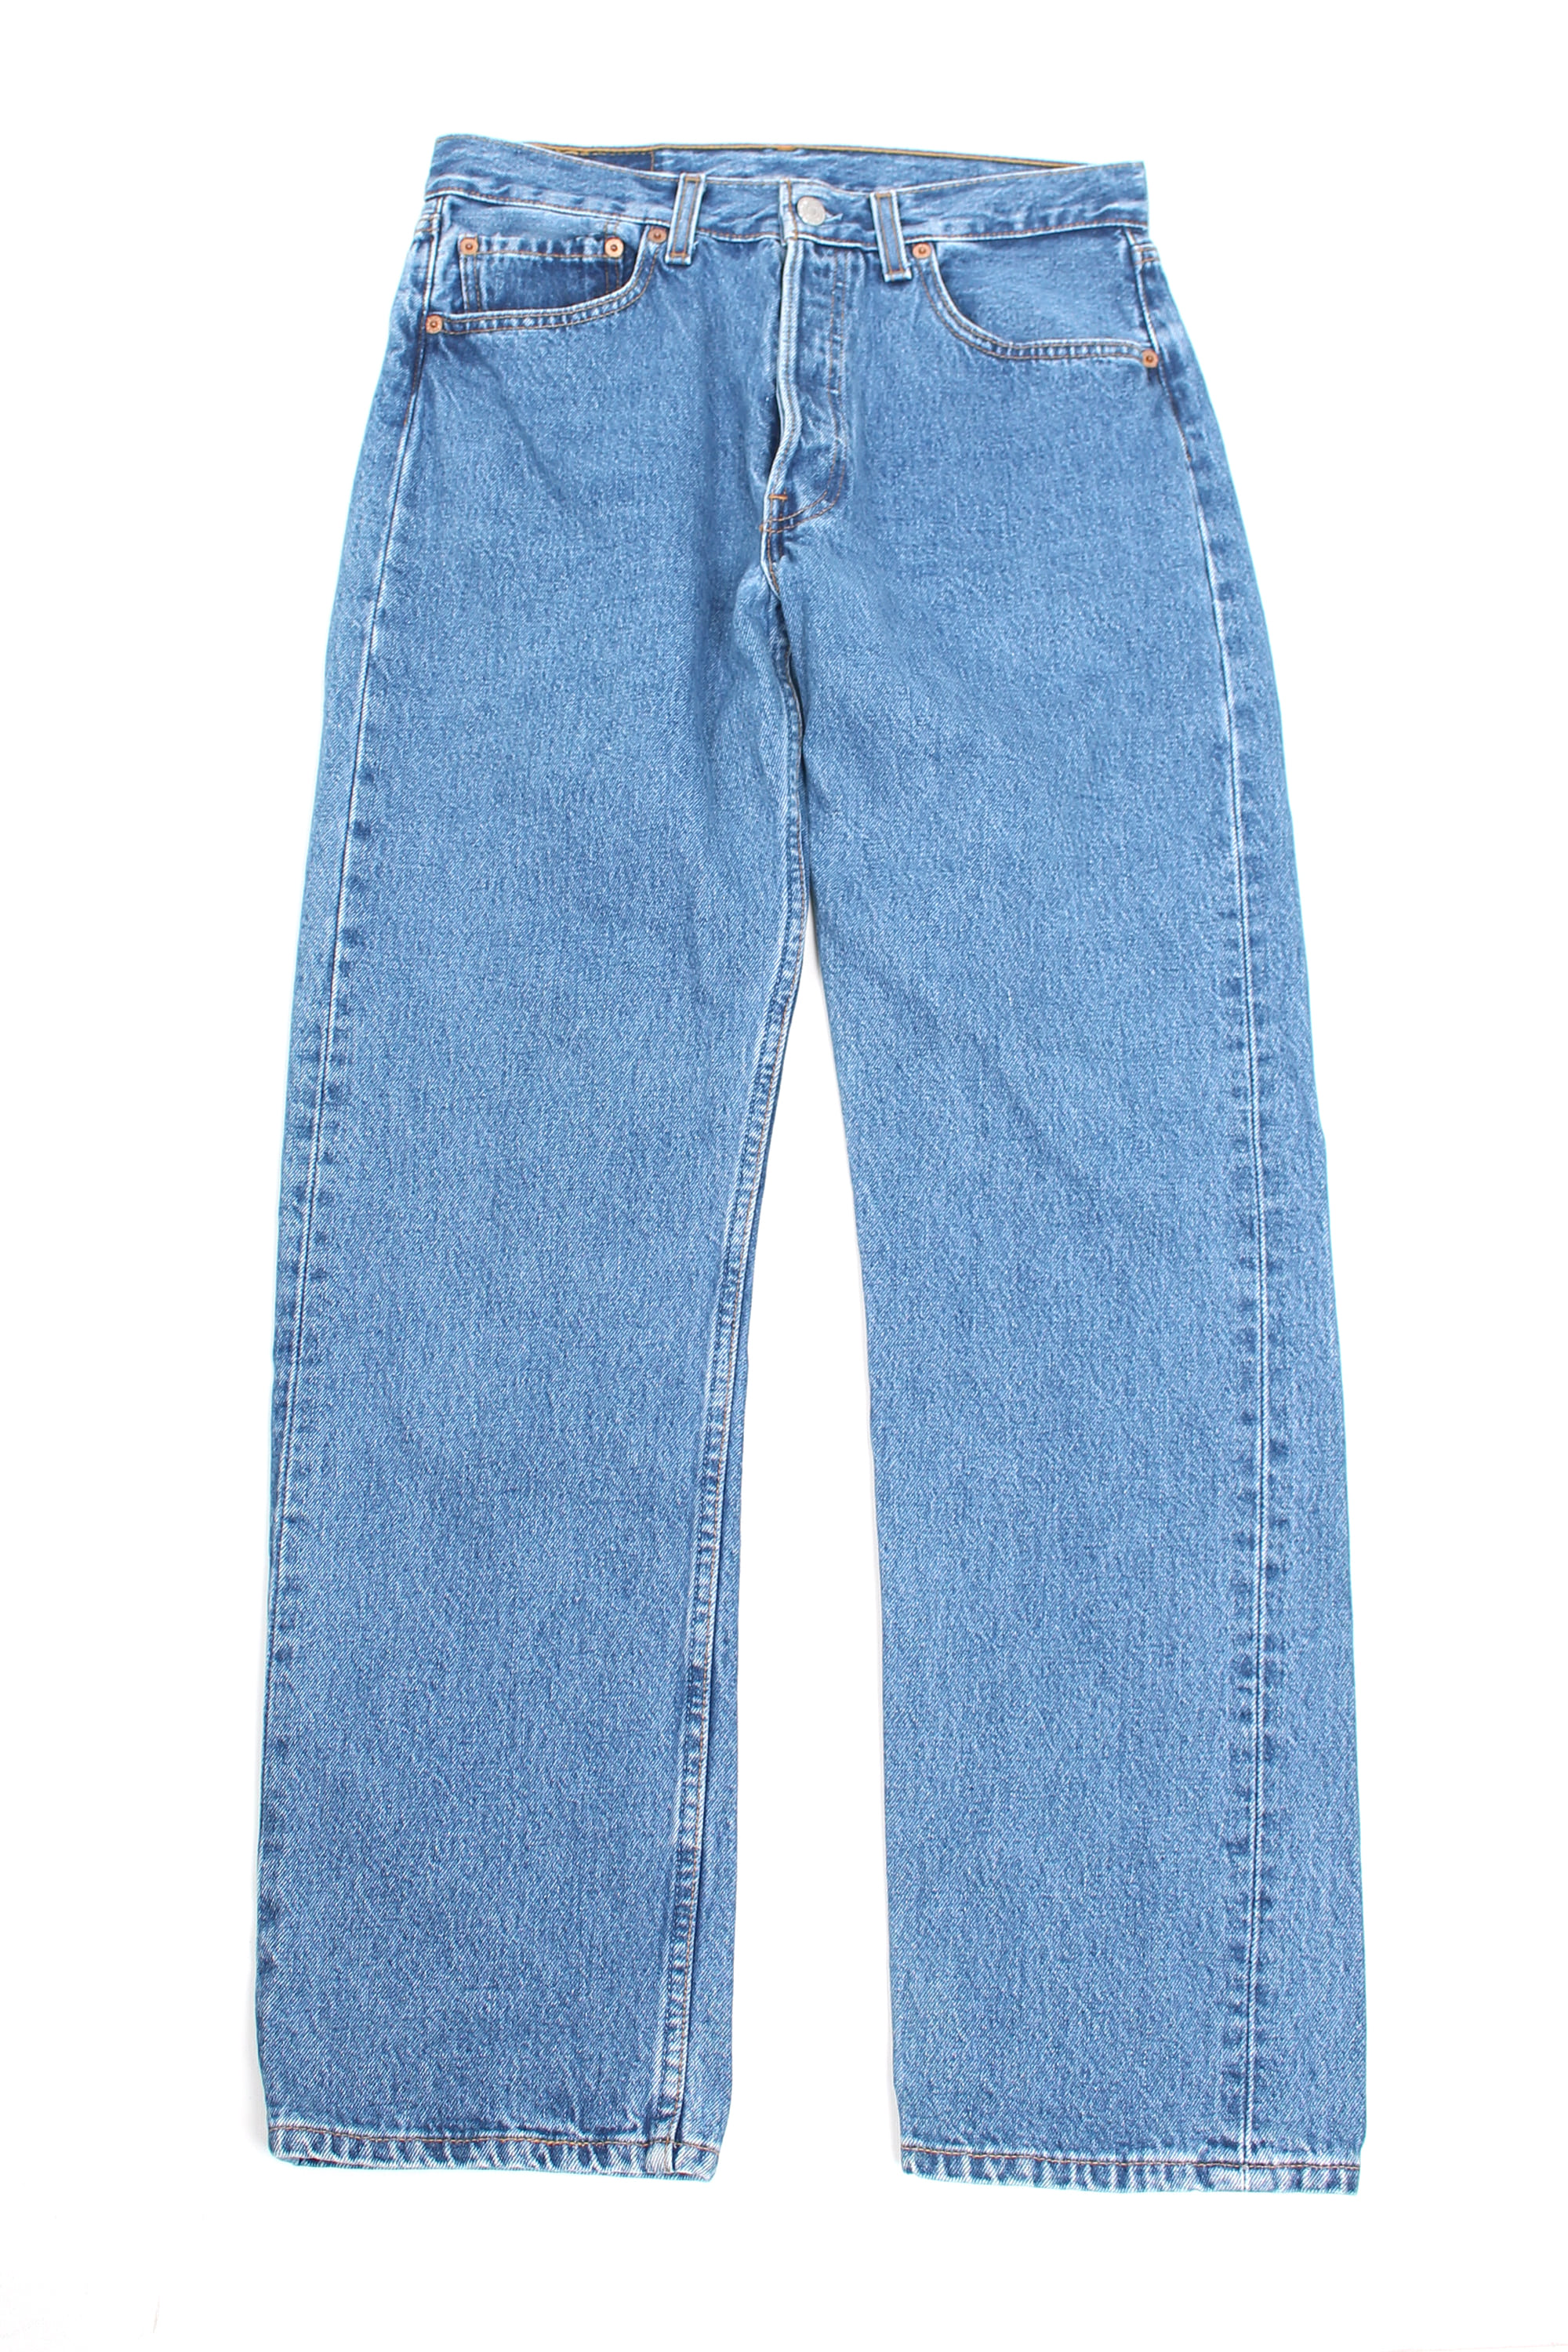 90s levi's 501 jeans - MANMADEFOREST